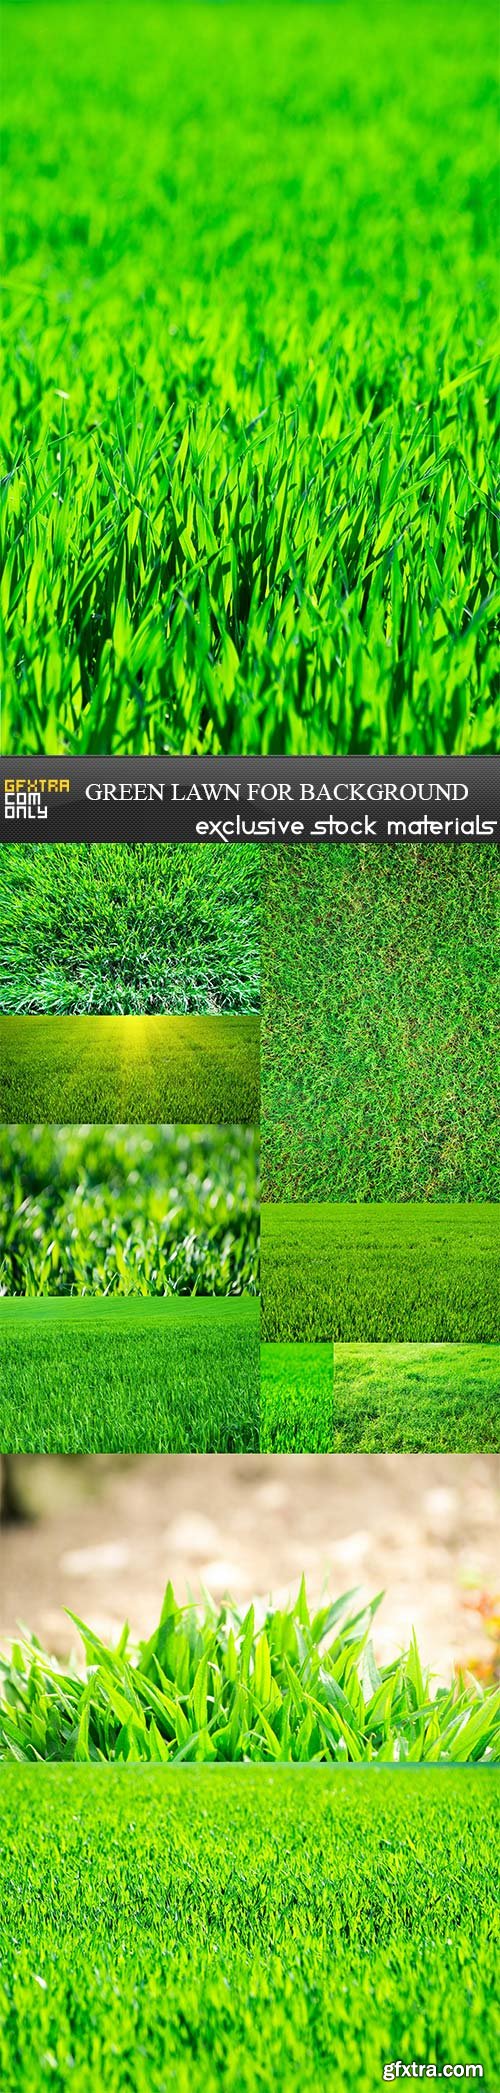 Green lawn for background, 10 x UHQ JPEG